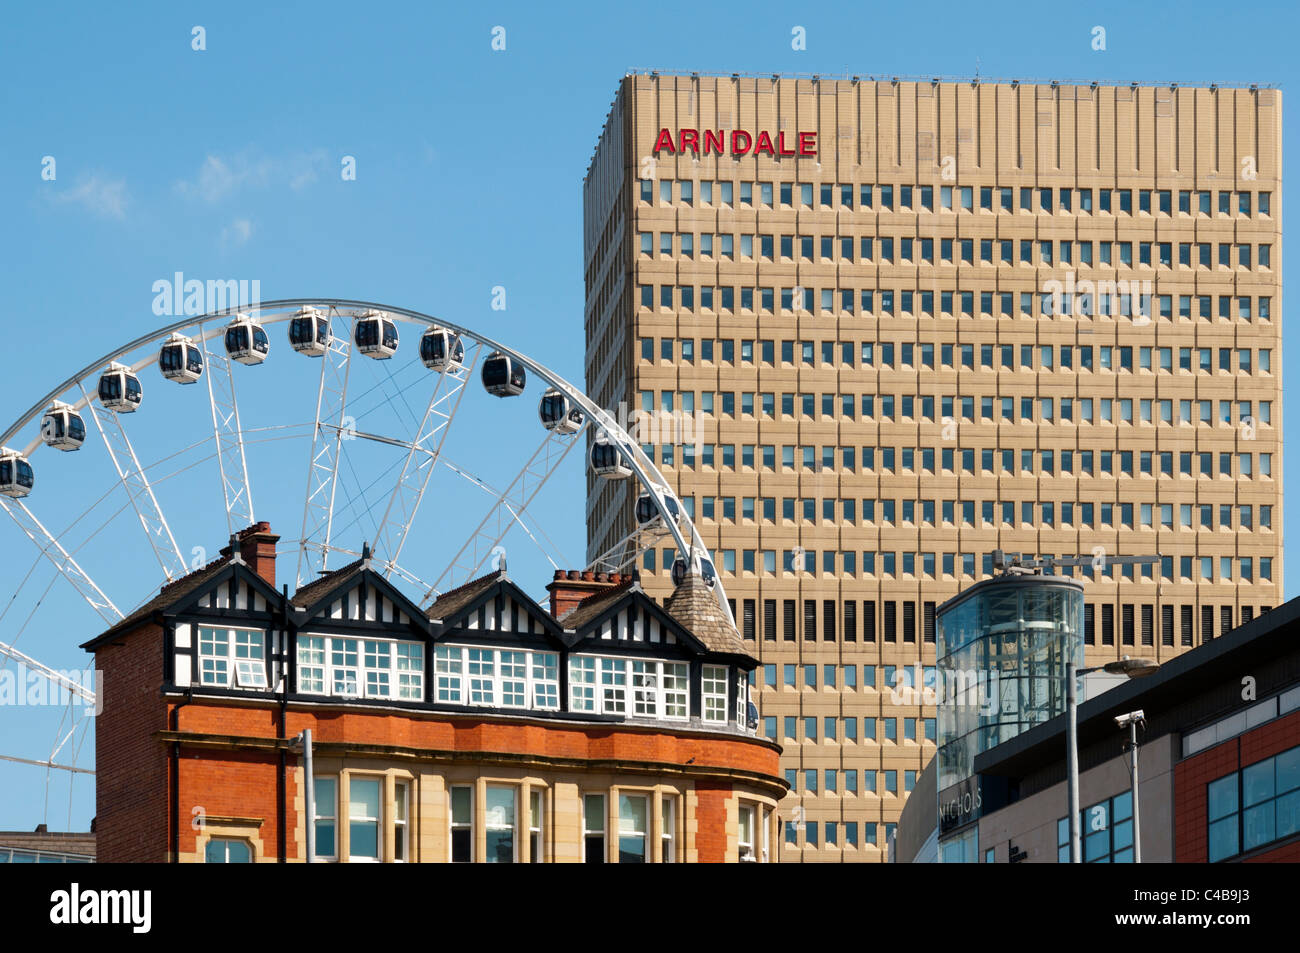 The Arndale Centre tower, Manchester Wheel and The Britannic Buildings, Manchester, England, UK Stock Photo